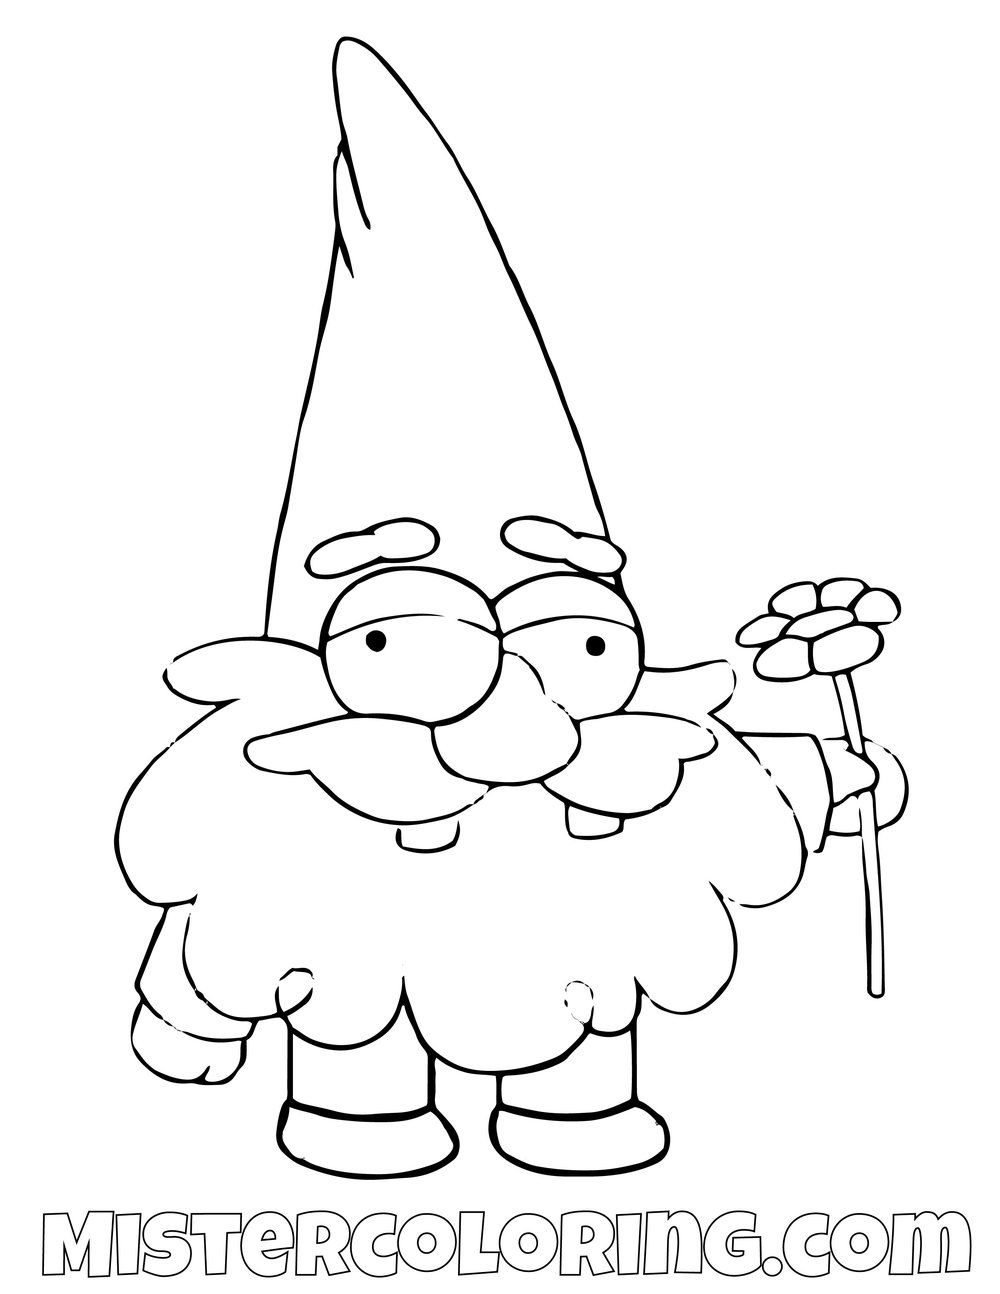 Jeff The Gnome from Gravity Falls from Gravity Falls